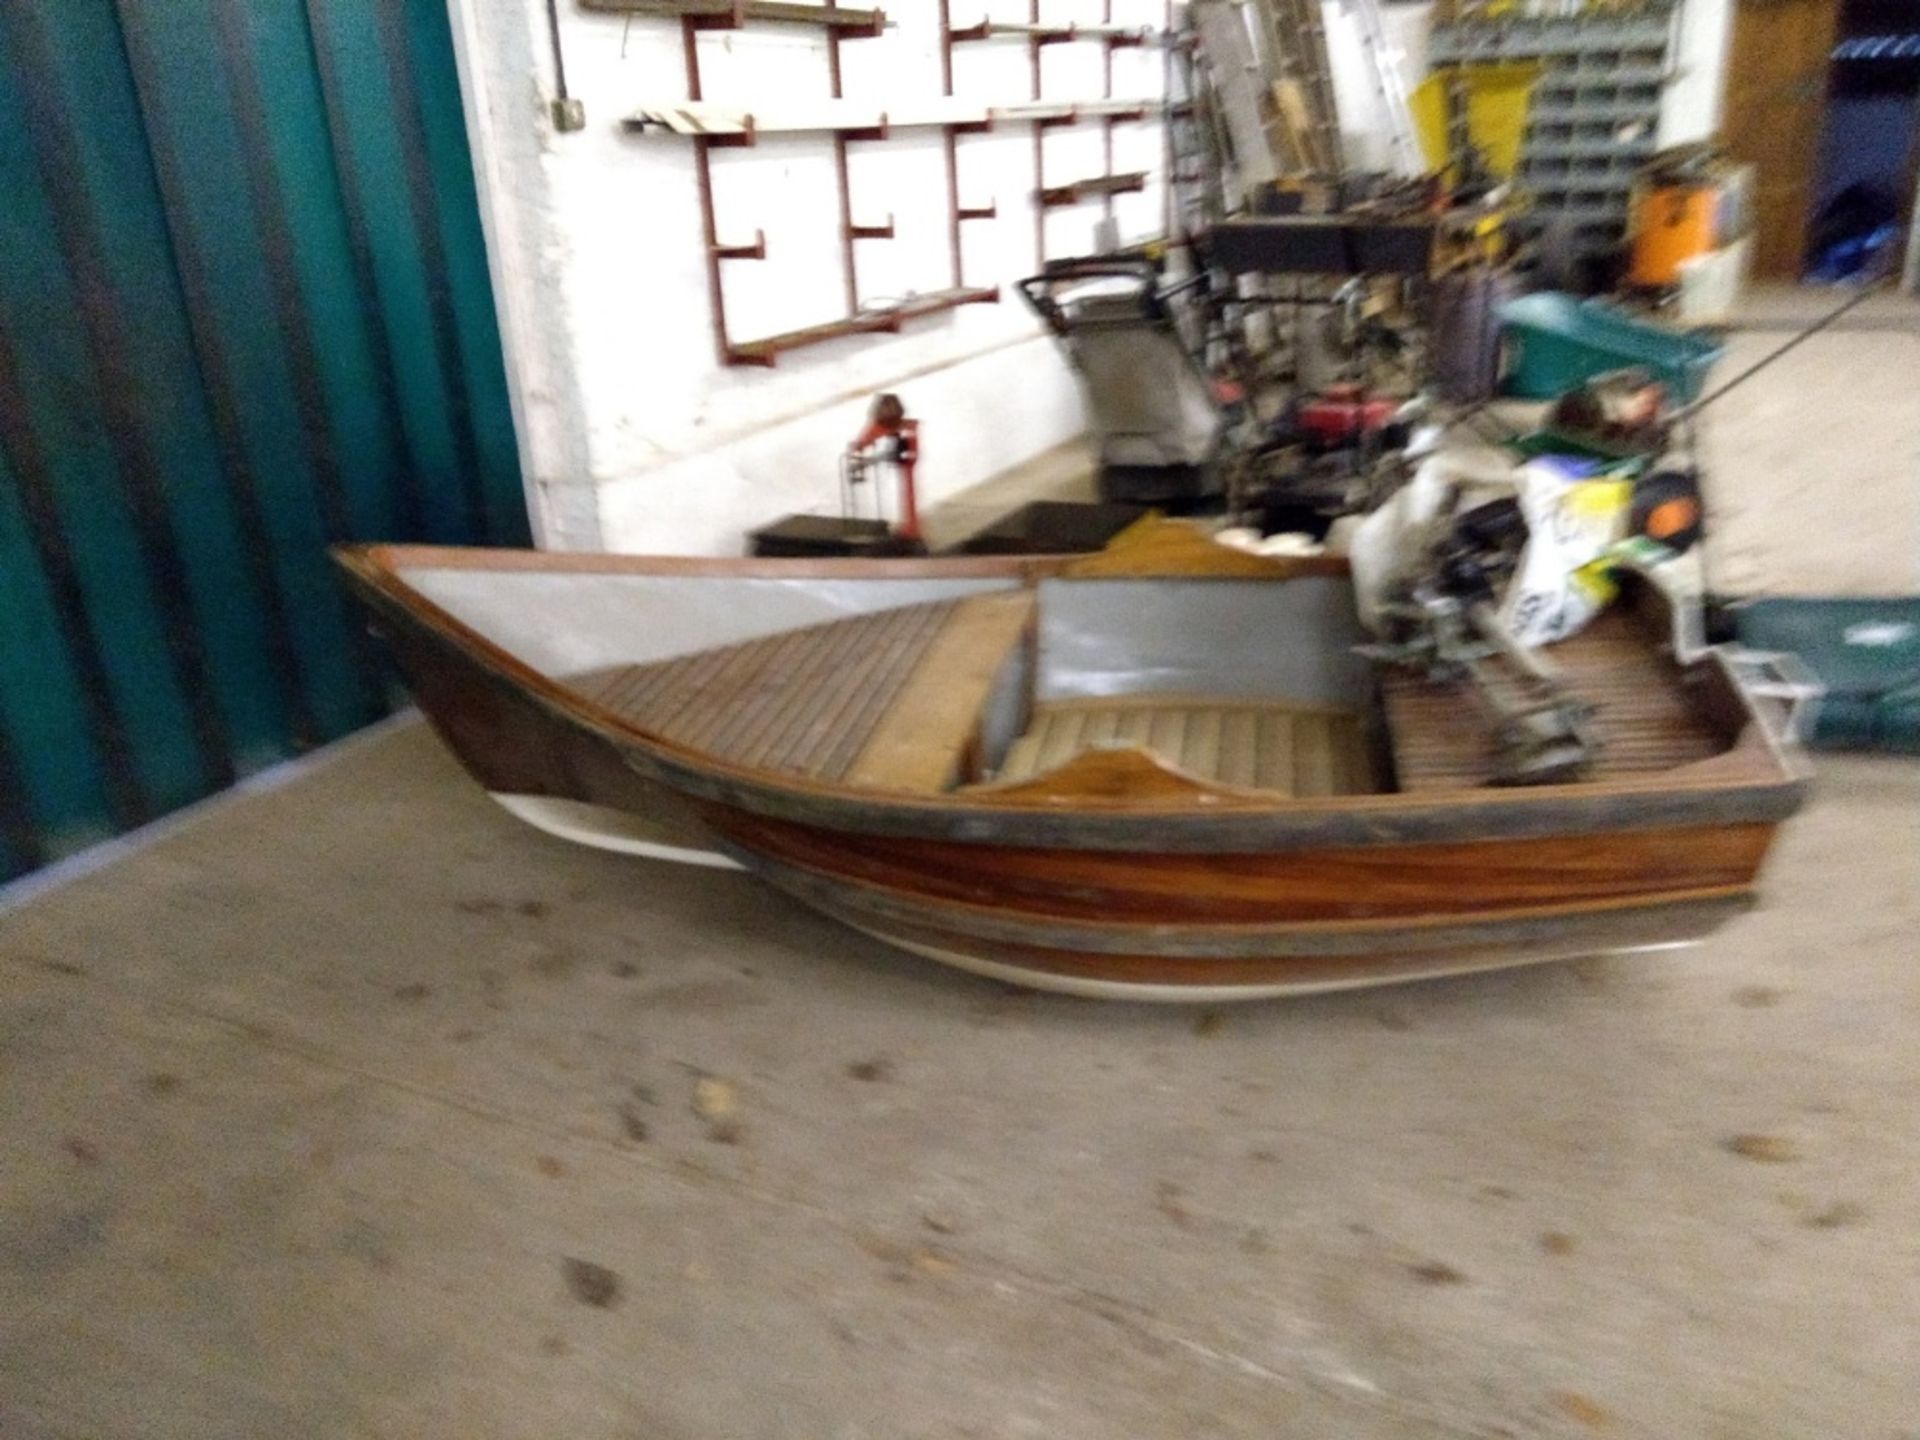 Bespoke Iroko strip built dingy/ yacht tender with British Seagull outboard motor included